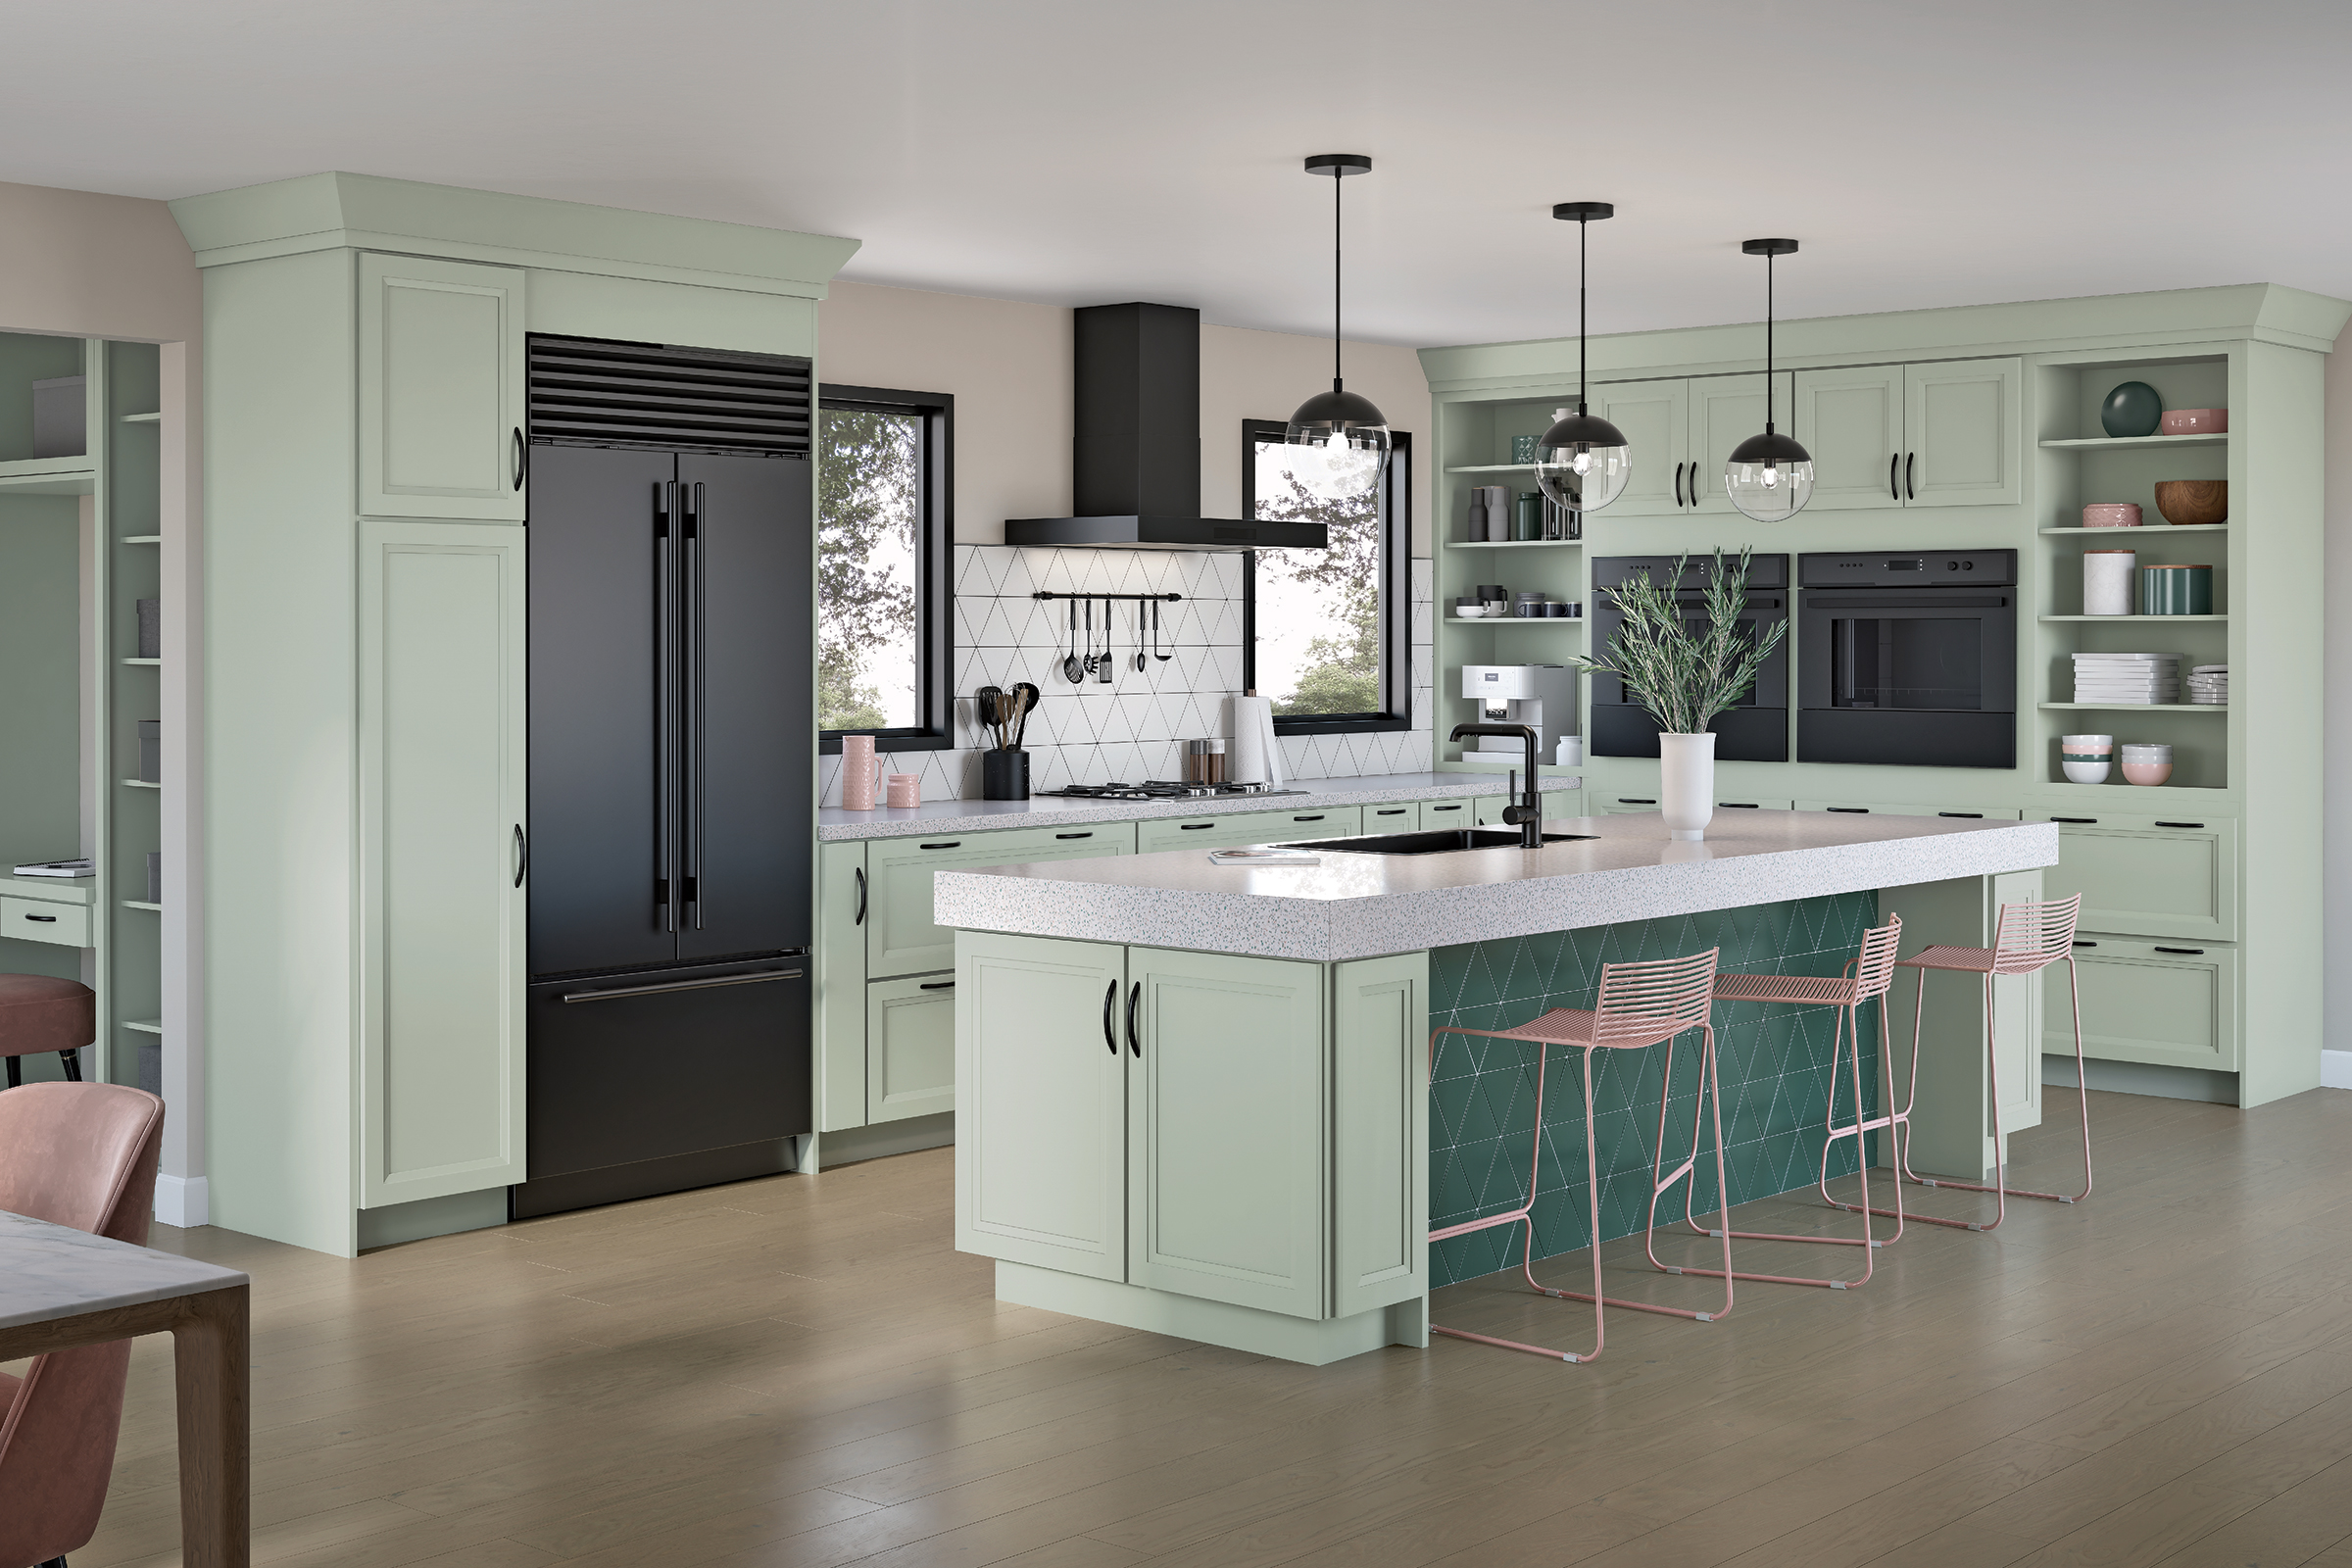 KraftMaid Contemporary kitchen cabinets in light green Serenity paint